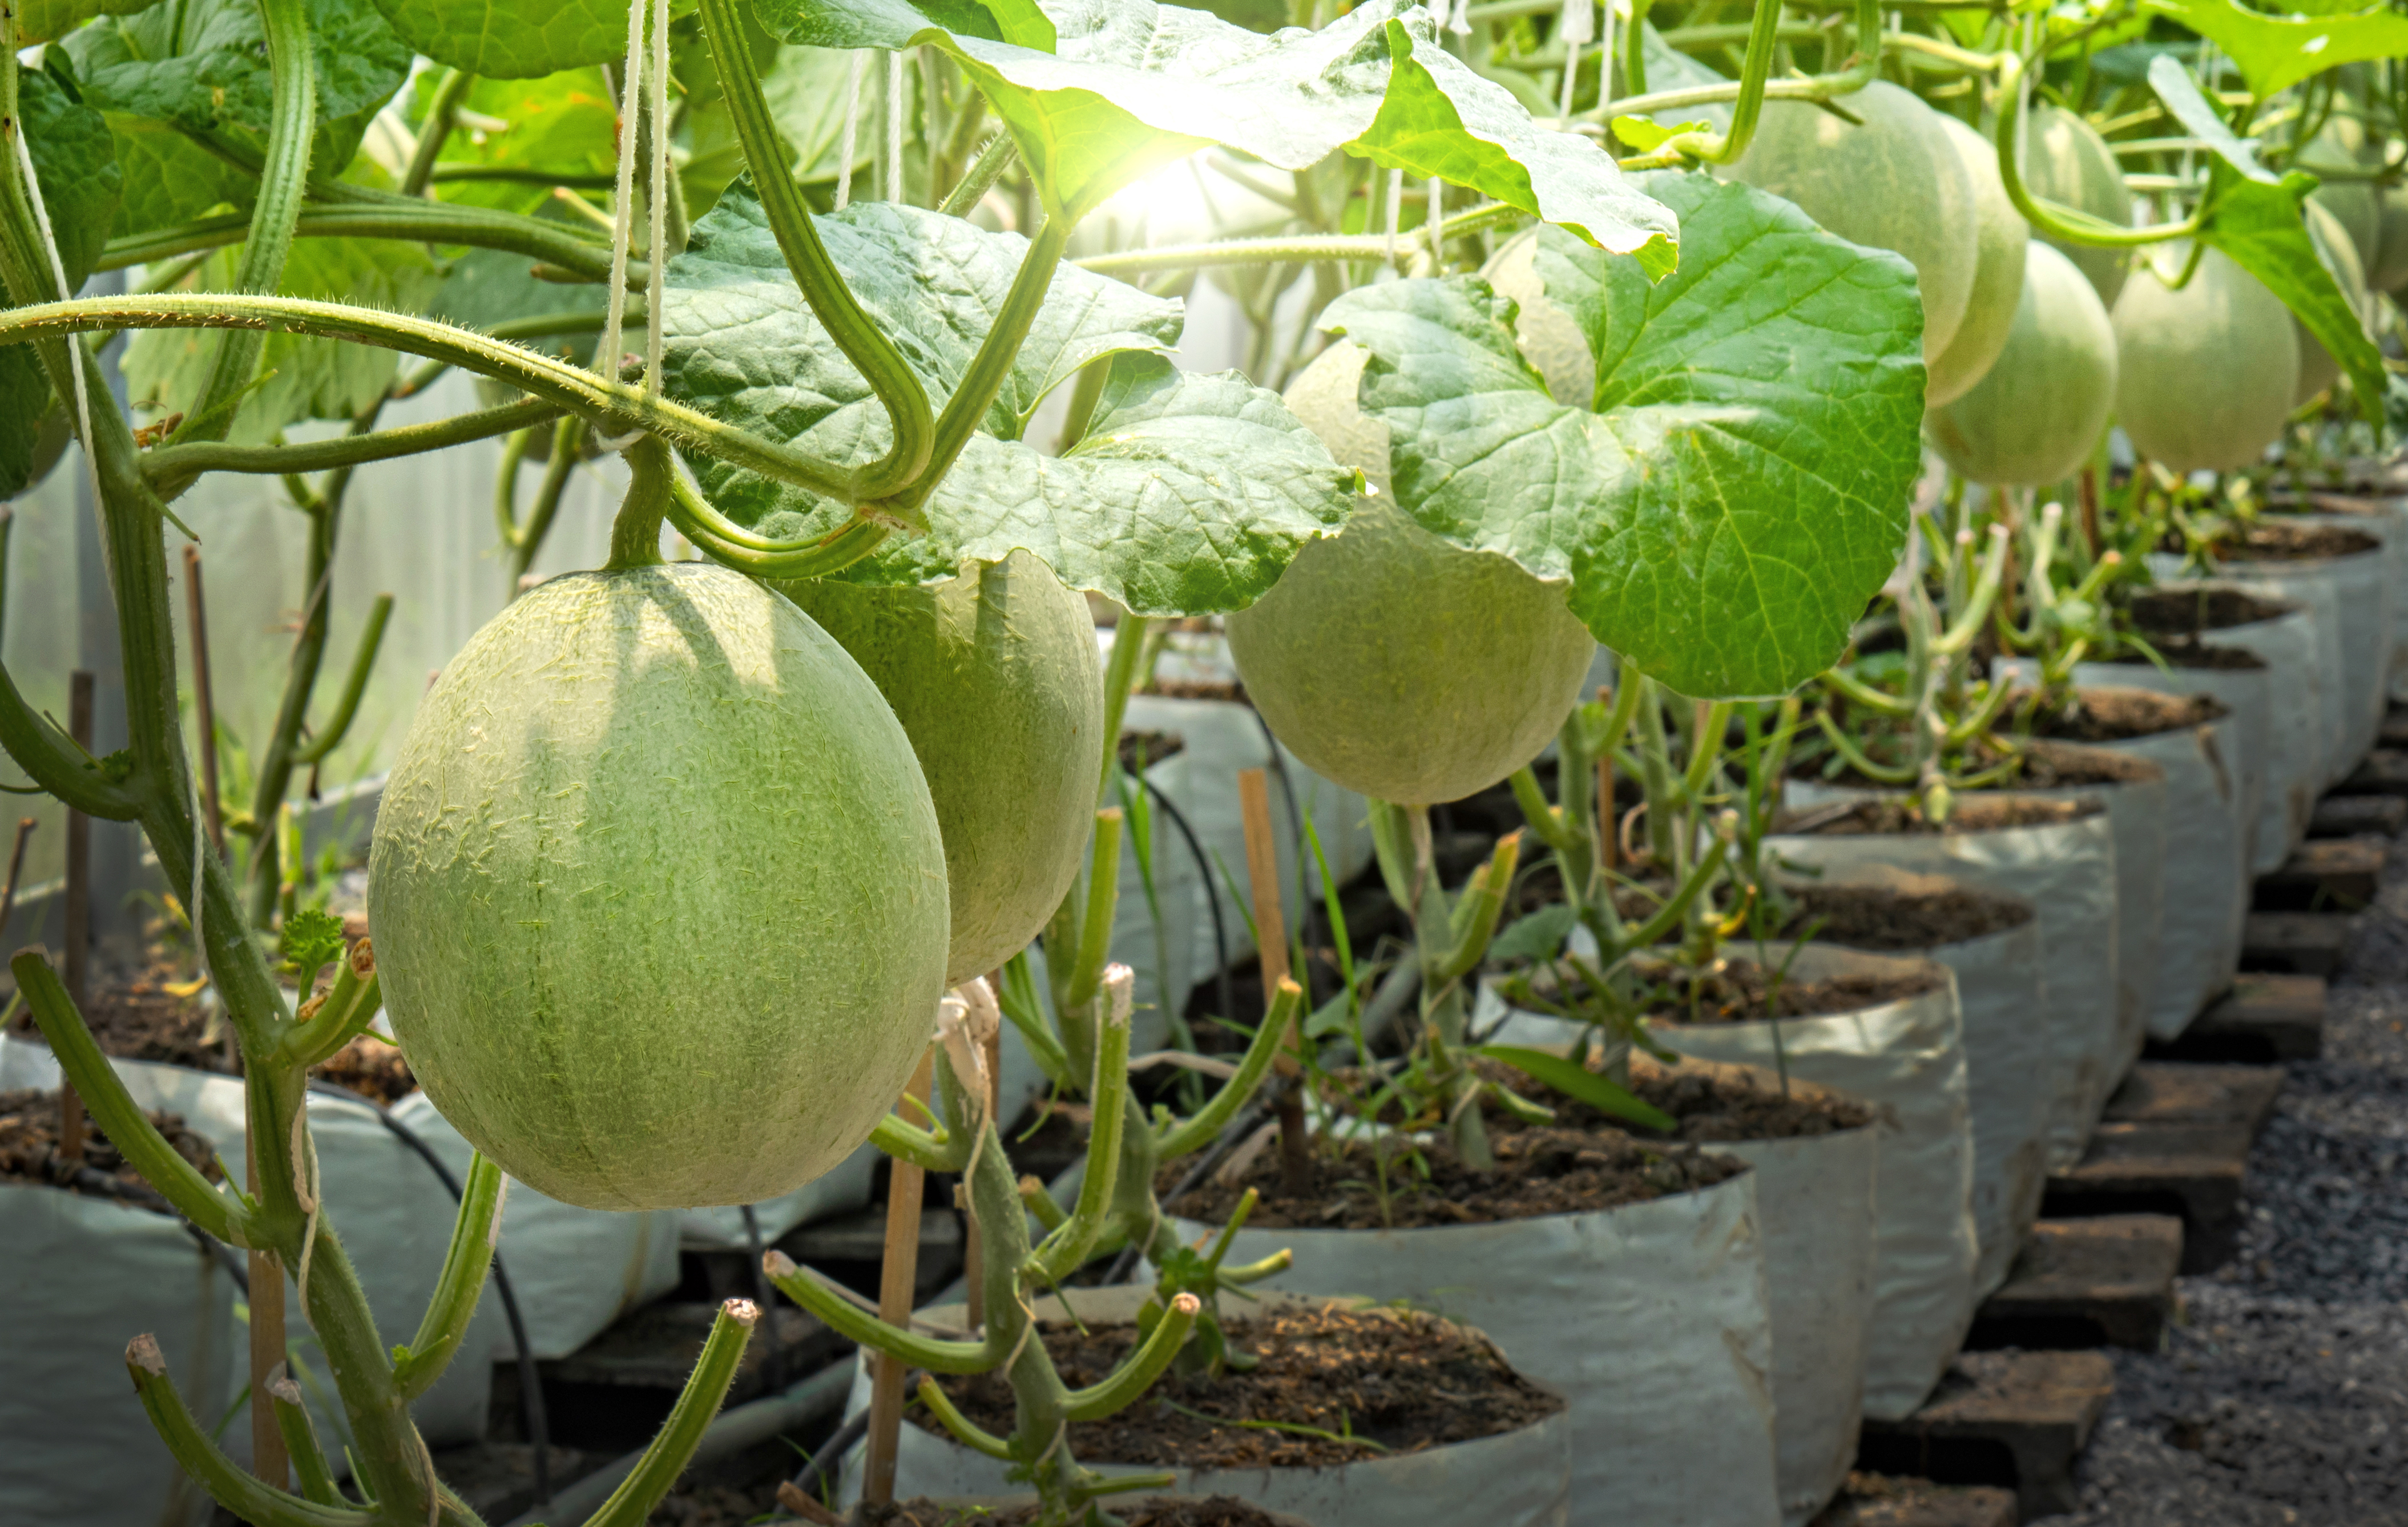 How to Grow Tomatoes, Watermelons, and Together | Hunker